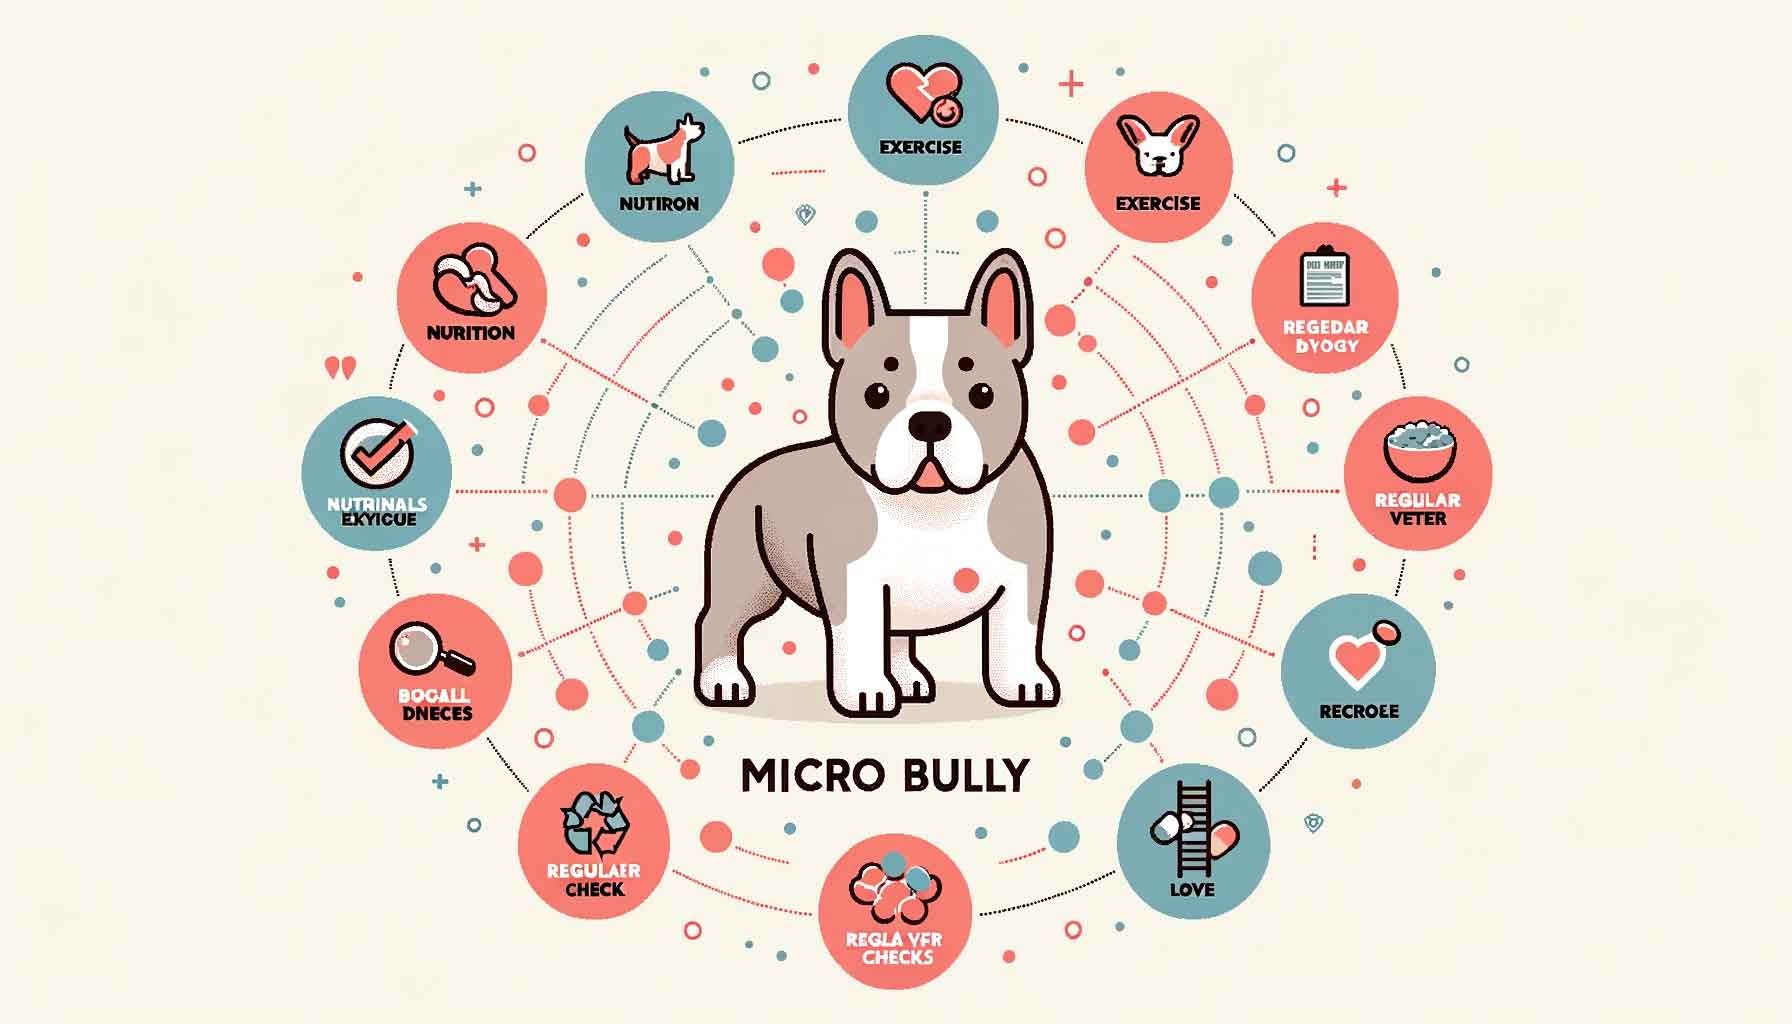 Illustrative timeline depicting a micro bully's progression through life. From left to right, the stages show a playful puppy, an energetic adolescent chasing a ball, and a majestic full-grown dog. Overlaying the timeline are icons of a heart (signifying love), a dog bowl (representing nutrition), a leash (indicating exercise), and calendar pages (symbolizing time)